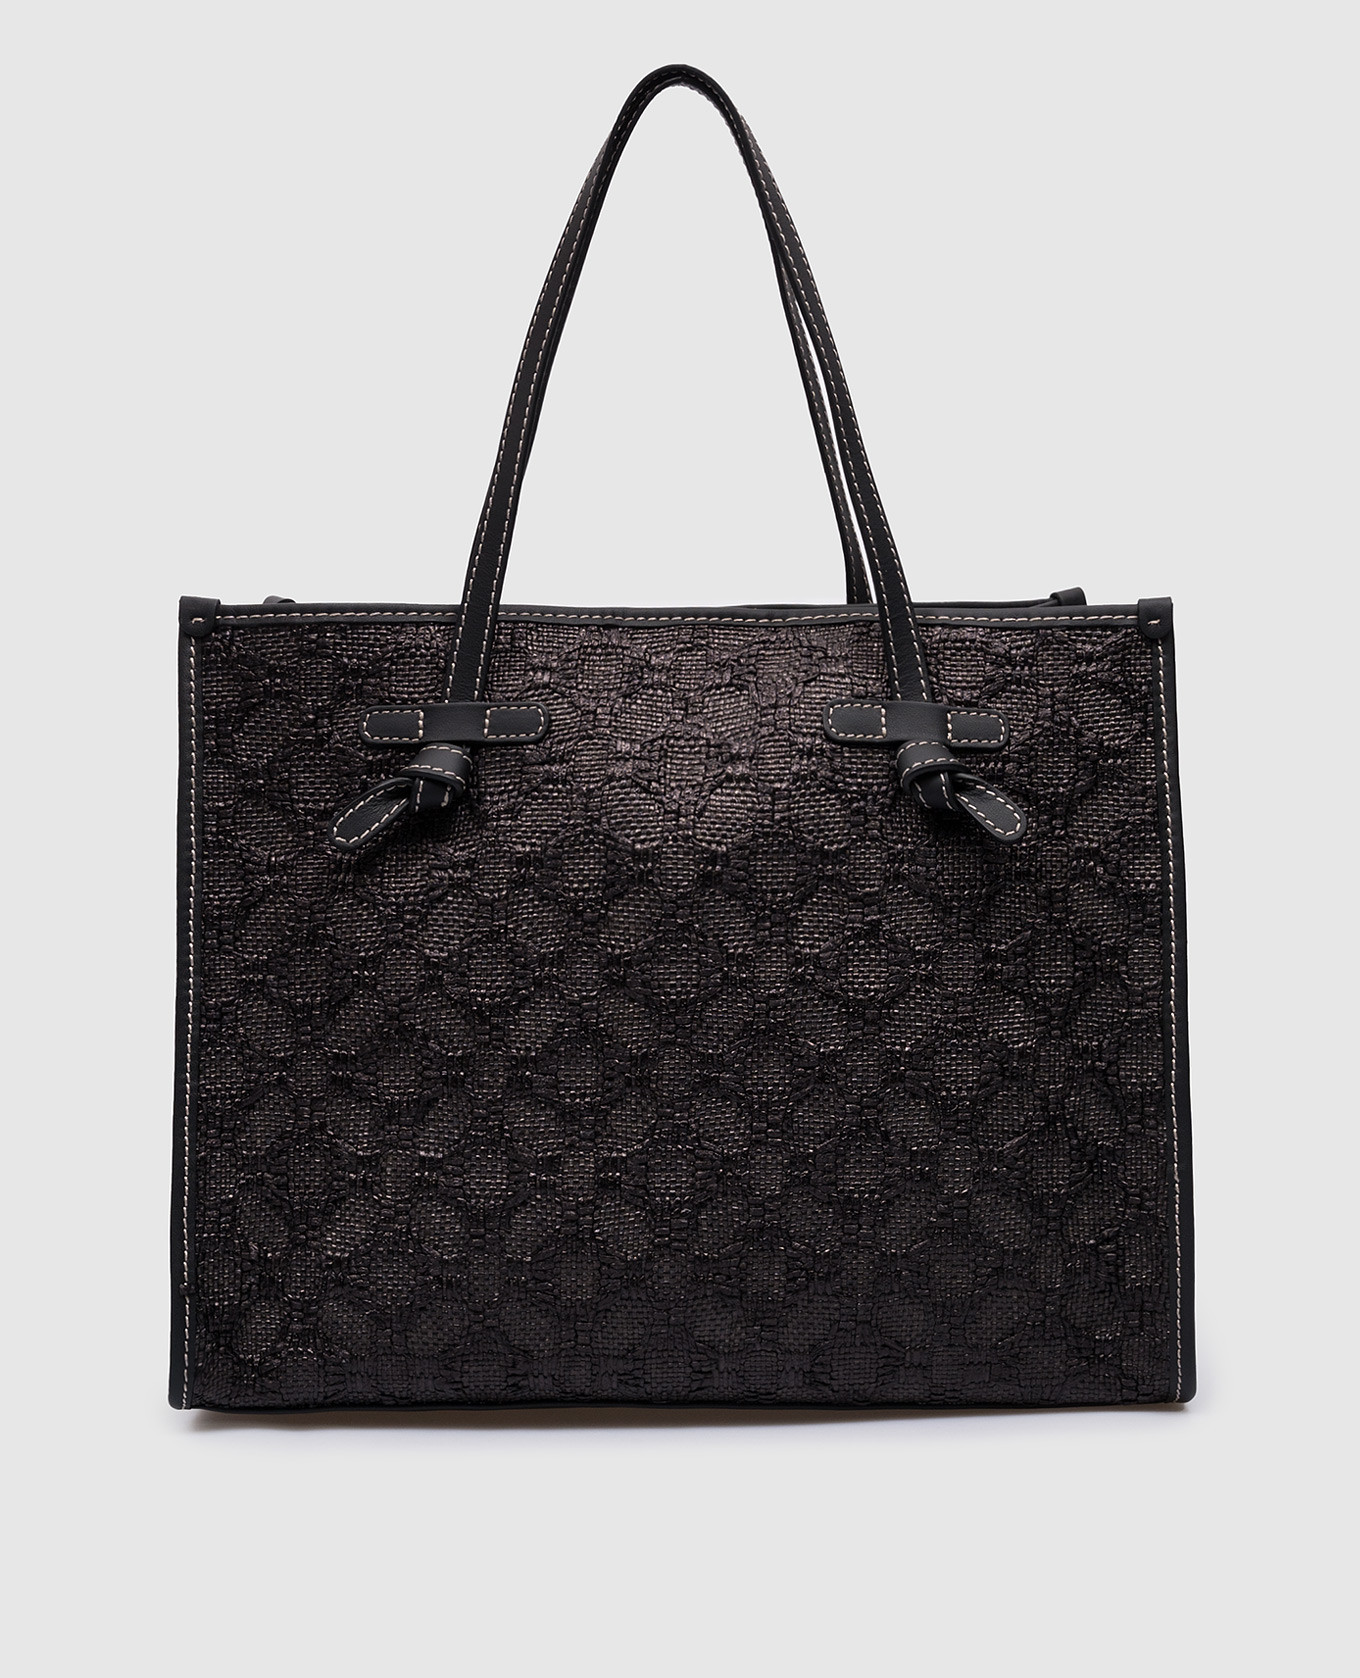 Black Marcella tote bag in textured weave with logo patch